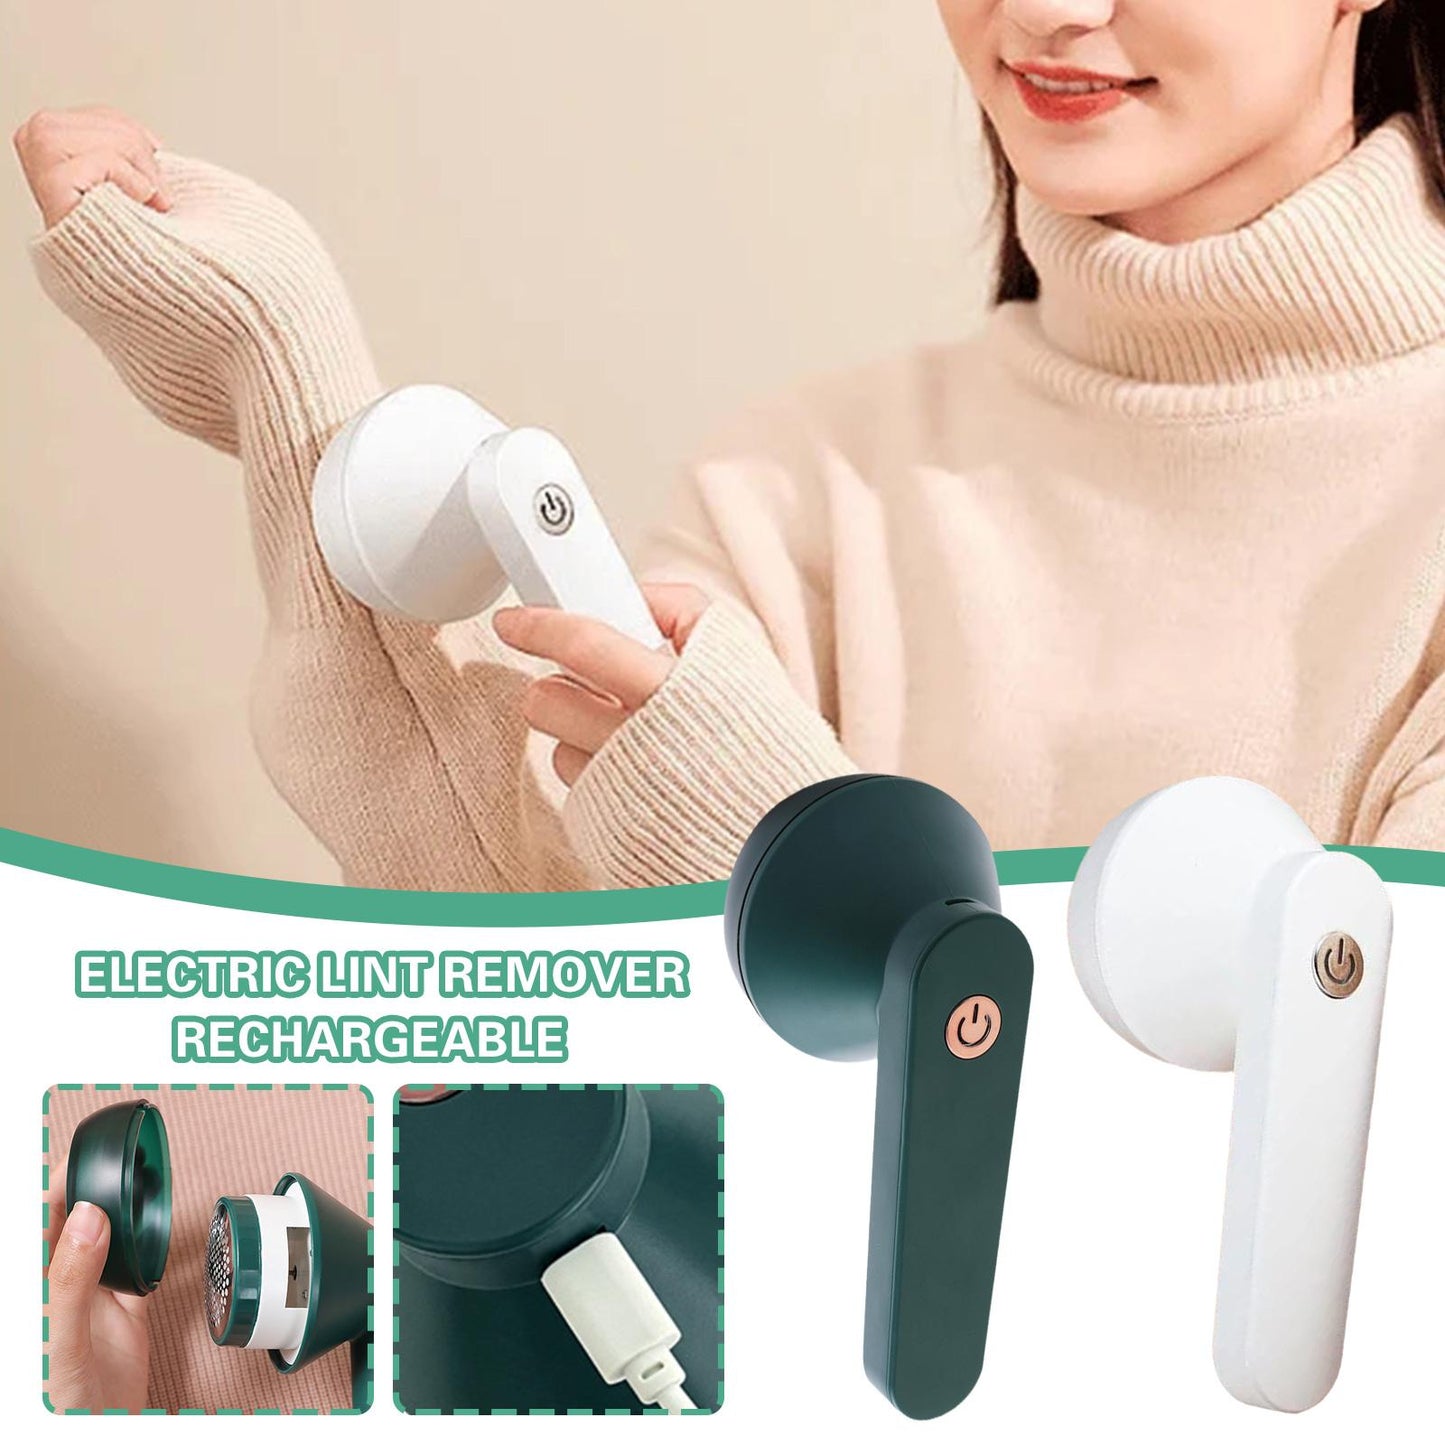 Electronic Lint Remover